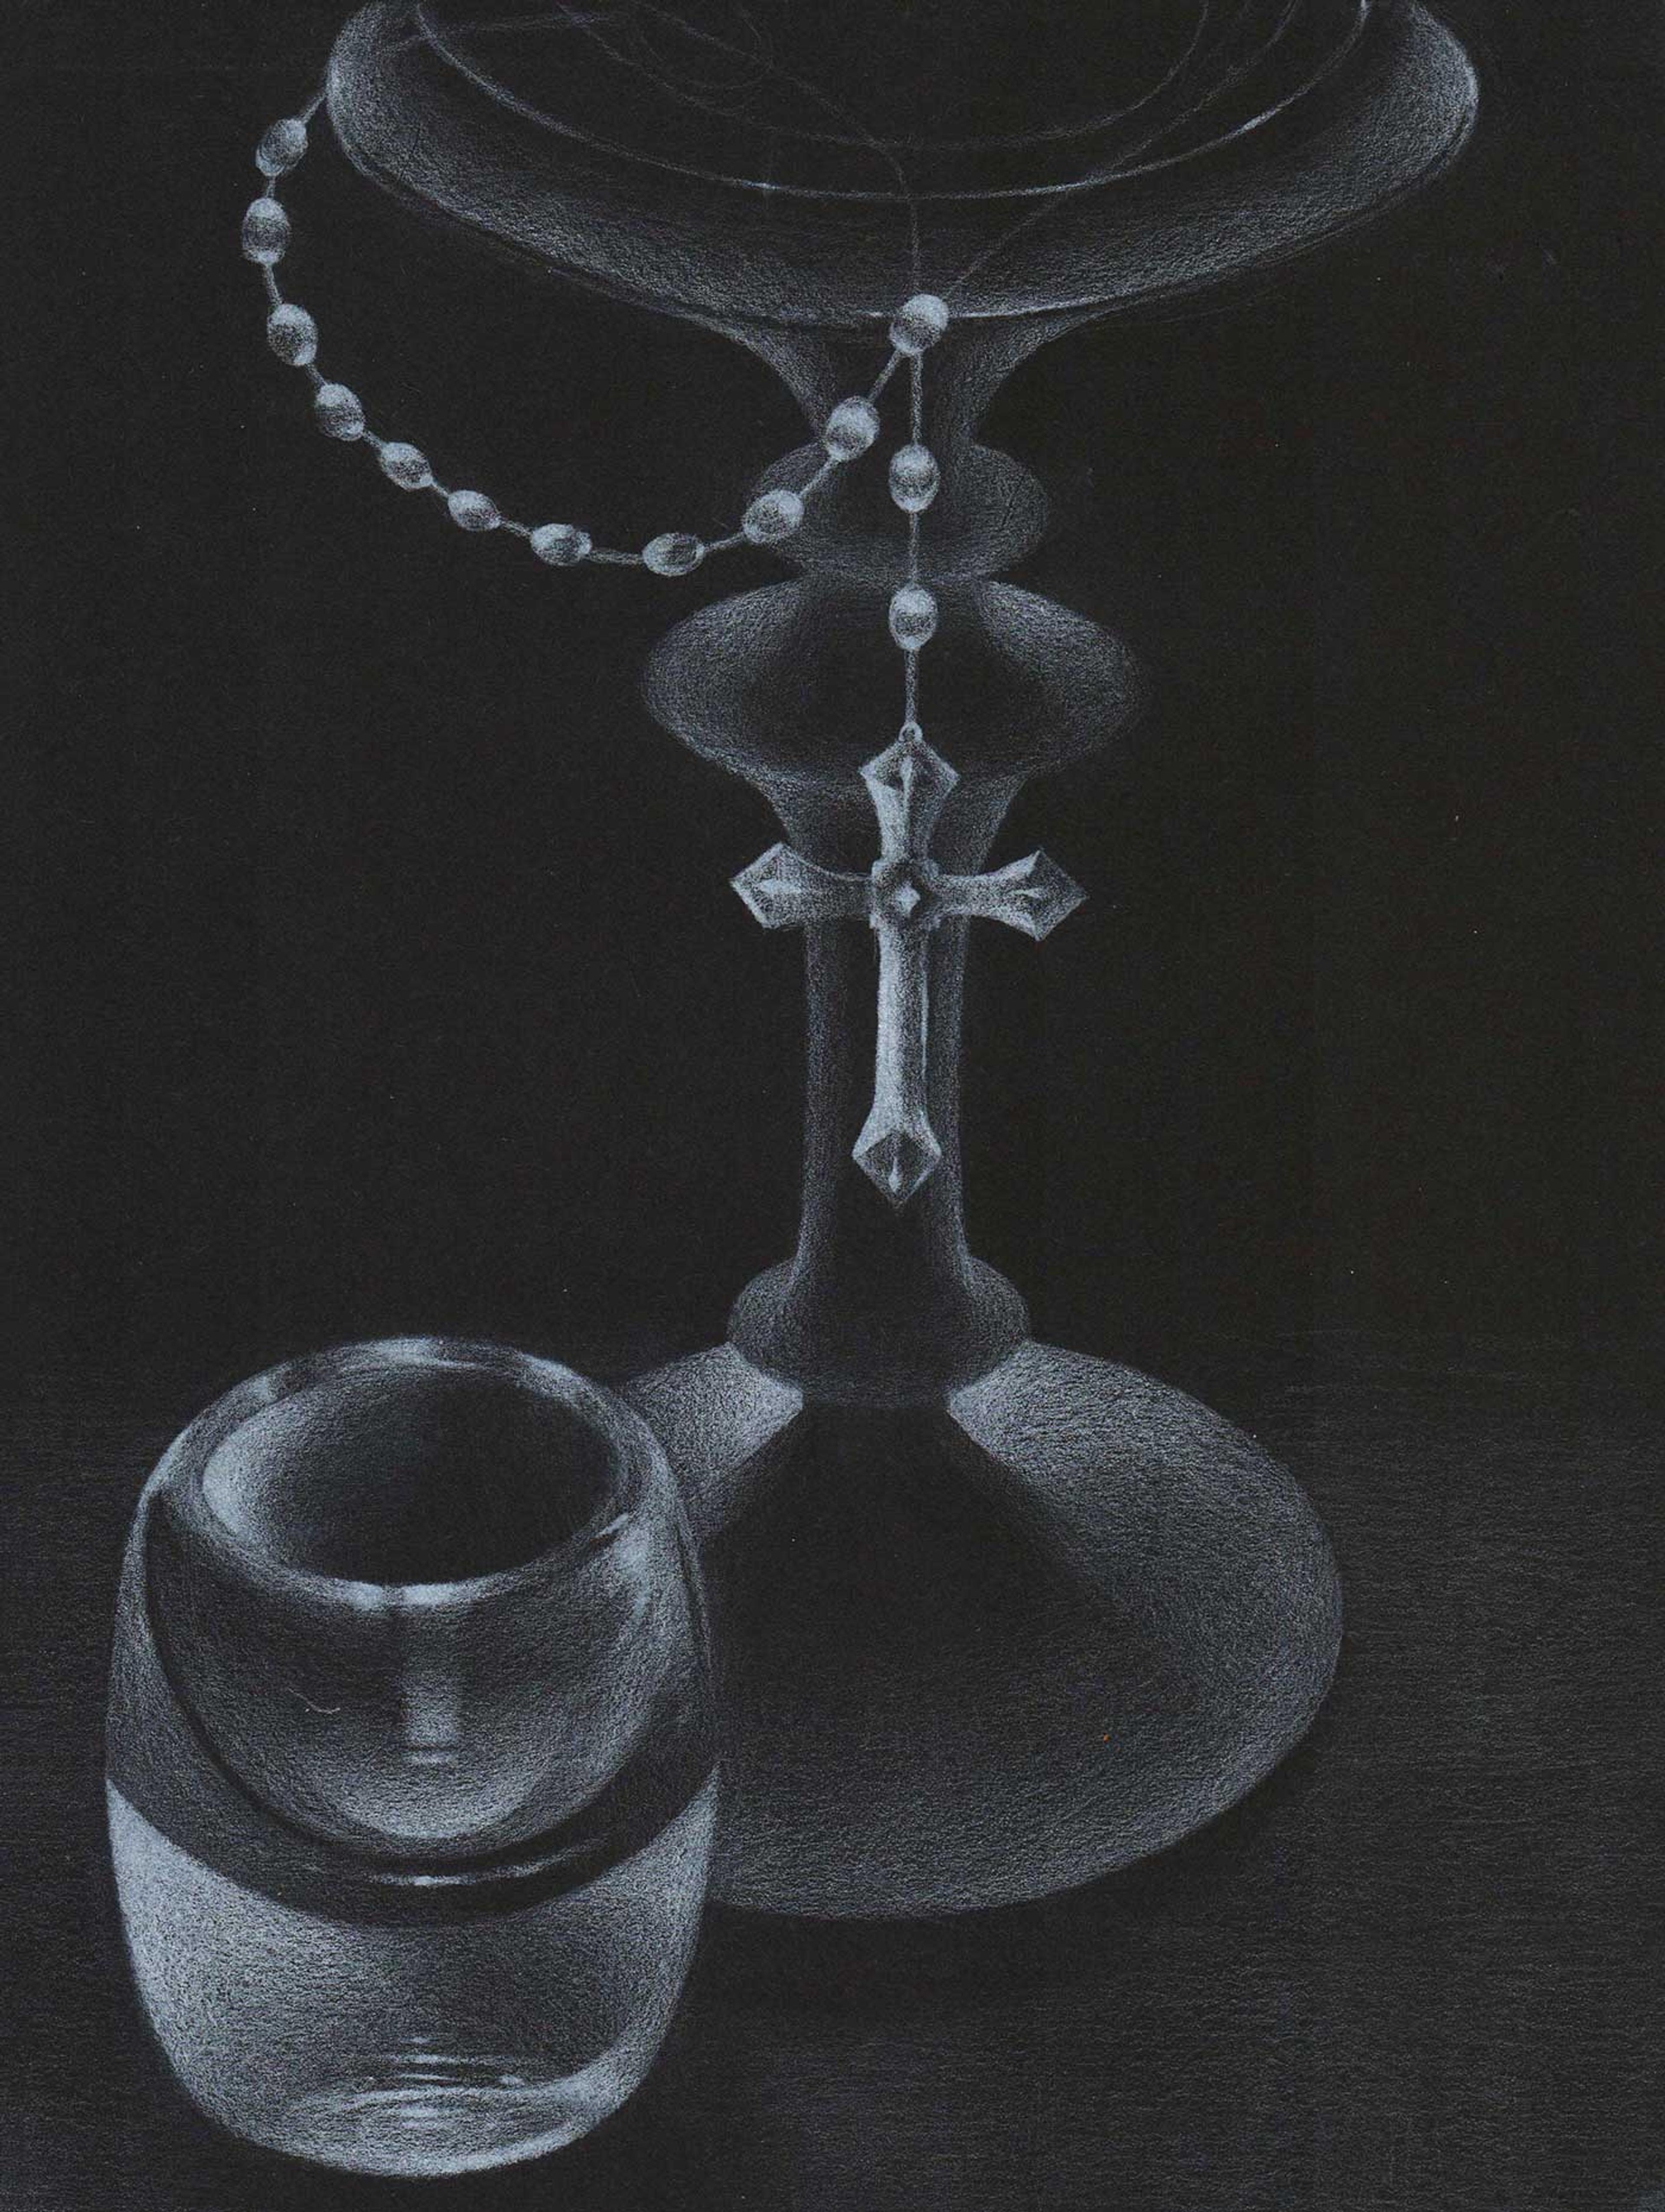 Still life of a glass, candle holder, and cross done in white on a black background.